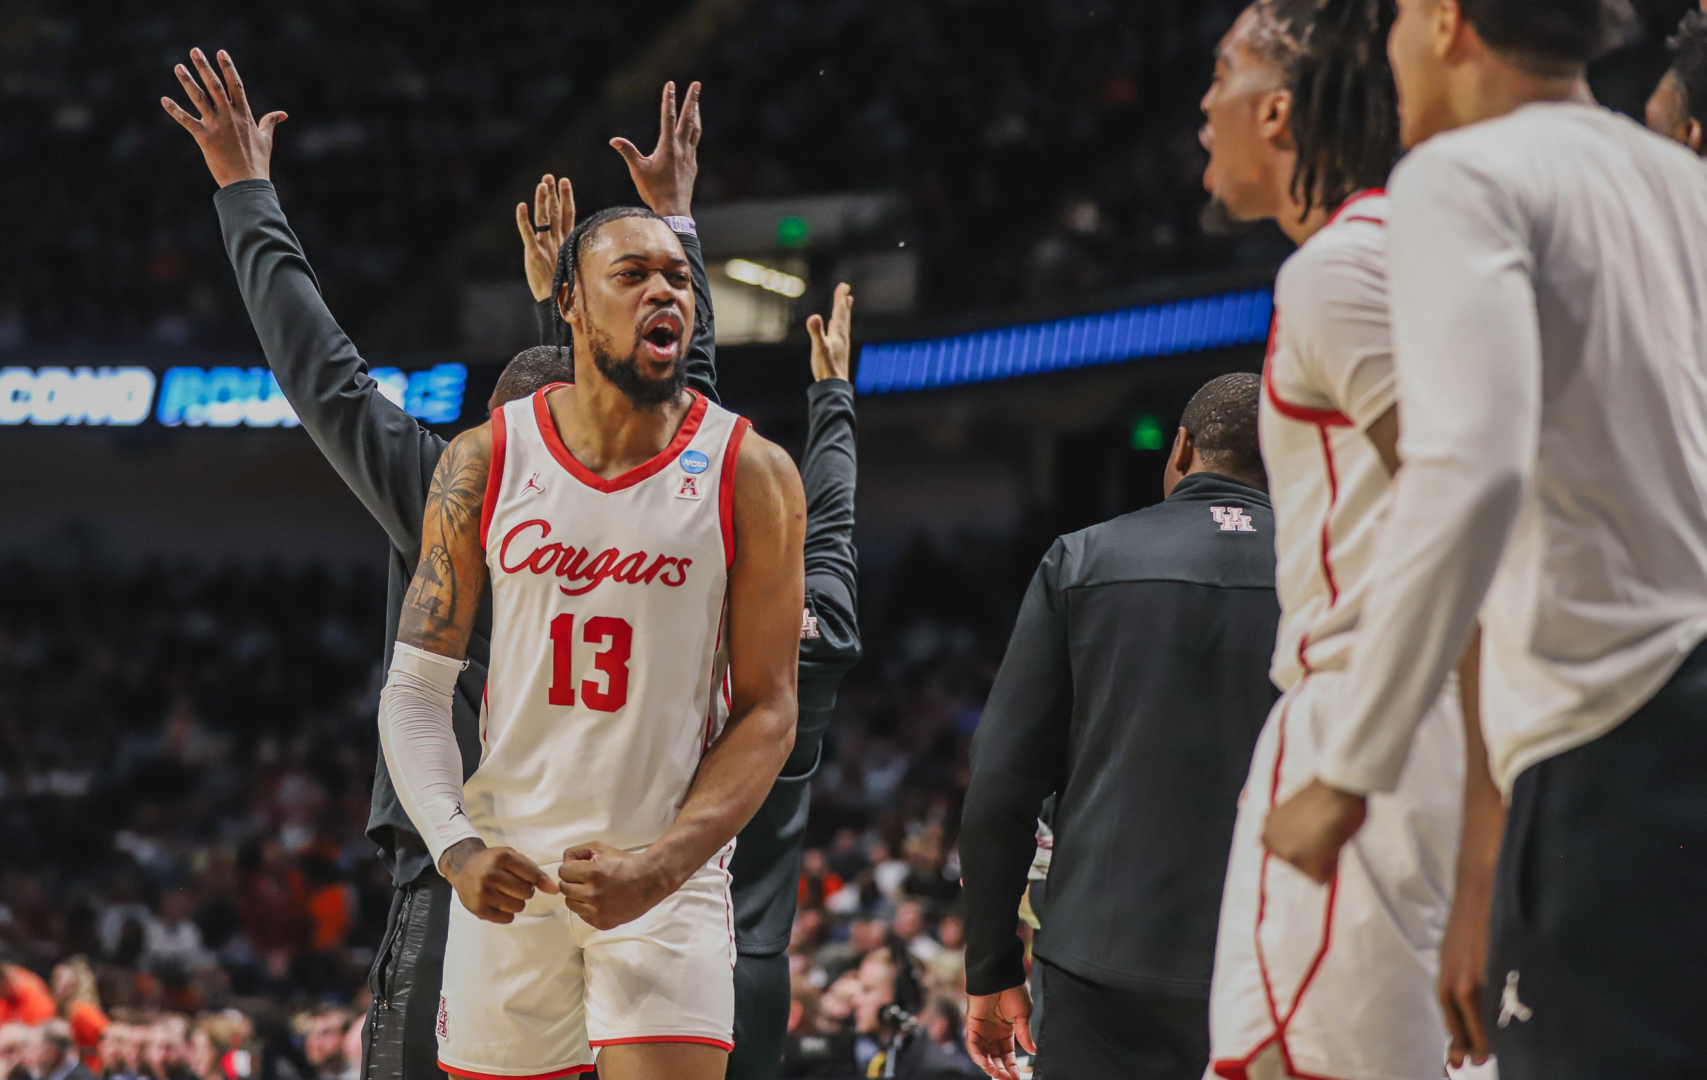 KANSAS CITY, MO. — Find a way. That has been Houston’s mantra all season. It will continue to be the message when the Cougars, making their fourth straight Sweet 16 appearance, take the court at T-Mobile Center on Friday night. “‘Find a way’ is exactly what it means, exactly what it sounds like,” said UH point guard Jamal Shead. “Find a way to win whether it’s scrapping and fighting to get a loose ball, rebound, anything, it’s just whatever it takes to win.” Miami (27-7) is the next obstacle on UH’s road to NRG Stadium. About Miami The Hurricanes are back in the Sweet 16 for the second straight season after Drake in their NCAA Tournament opener and Indiana in the round of 32. Miami, the regular season co-champions of the ACC with Virginia, has one of the most potent offense’s in college basketball, averaging 79.1 points per game. Miami head coach Jim Larrañaga plays a small lineup, starting four guards, which allows the Hurricanes to spread the floor. “(Larrañaga) puts his best players in position to be successful and he lets them play,” said UH head coach Kelvin Sampson. “You can tell they have great freedom.” Isaiah Wong, the AAC’s Player of the Year, leads Miami in scoring with 16.1 points per game. Against Indiana in the round of 32, Wong scored 27 points and grabbed eight rebounds. Jordan Miller and Kansas State transfer Nijel Pack both average double figures scoring and shoot better than 35 percent from 3. Wooga Poplar, a 6-foot-5-inch guard, is questionable for Friday’s game after suffering a back injury in Miami’s win over Indiana. Larrañaga said Poplar practiced on Thursday and looked good. “I’ll talk to my trainer, and he’ll give me an indication of whether Wooga’s ready to go,” Larrañaga said. “If he’s ready to go, he’ll be in the starting lineup as always.” Poplar, who averages 8.4 points, is lethal from 3, hitting 40.2 percent of his shots beyond the arc this season. Rounding out the Hurricanes’ starting five is Norchard Omier, a 6-foot-7-inch forward who averages a double-double scoring 13.4 points and pulling down 10.1 rebounds per game. Omier has 31 rebounds in Miami’s first two NCAA Tournament game. “Their most valuable player is probably Omier,” Sampson said. “He’s probably the best rebounder that we’ve played against.” UH forward J’Wan Roberts, who leads the Cougars in rebounding, echoed his head coach on what he’s seen from Omier on film. “He’s a relentless rebounder,” Roberts said. “Somehow the ball always finds him.” As a team, the Hurricanes are top-40 in the country in 2-point field goal percentage (54.1 percent), 3-point field goal percentage (36.8 percent) and free throw percentage (77.4 percent). “They’re probably the best offensive team that we’ve played this year at all five positions,” Sampson said. UH injury updates Marcus Sasser, who has been dealing with a groin injury he suffered on March 11, said he felt about 80 to 85 percent prior to UH’s practice on Thursday afternoon. With the way his recovery has been progressing, UH’s All-American guard said he expects to be at 90 percent for Friday’s game against Miami. “In practice, I can move a little bit more without it hurting. I can do a lot more things that I couldn’t do last week,” Sasser said. “The progression is there for sure. It’s getting better day by day” Shead, who has been dealing with patellar tendonitis in his right knee, said he feels fully healthy after having nearly a week to recover since UH beat Auburn to advance to the Sweet 16. “I’m back to 100 percent,” Shead said. Strength on strength Miami can light up the scoreboard, averaging 74 points per game in the NCAA Tournament. “Every one on (Miami) can score the ball in a variety of ways,” Shead said when asked about the challenges the Hurricanes present. “They can really shoot the ball.” UH almost always holds its opponent under its scoring average, ranking second in the country in scoring defense. In the second half of its win over Auburn in the round of 32, UH held Auburn to just 16.7 from the field. “We’re 33-3 not because we’re an offensive juggernaut. We’re 33-3 because we can defend and rebound,” Sampson said. One of those things will have to give on Friday night. A high-scoring, shootout favors the Hurricane. A grind it out, physical battle gives the advantage to the Cougars. “They’re a great offensive team, we’re a great defensive team,” Sasser said. “I just feel like whoever plays to their strengths the best is probably going to win.” How to watch Tipoff is scheduled for 6:15 p.m. on Friday. The game will air on CBS with Jim Nantz, Bill Raftery, Grant Hill and Tracy Wolfson on the call. The game can also be heard via radio on KPRC 950 AM.